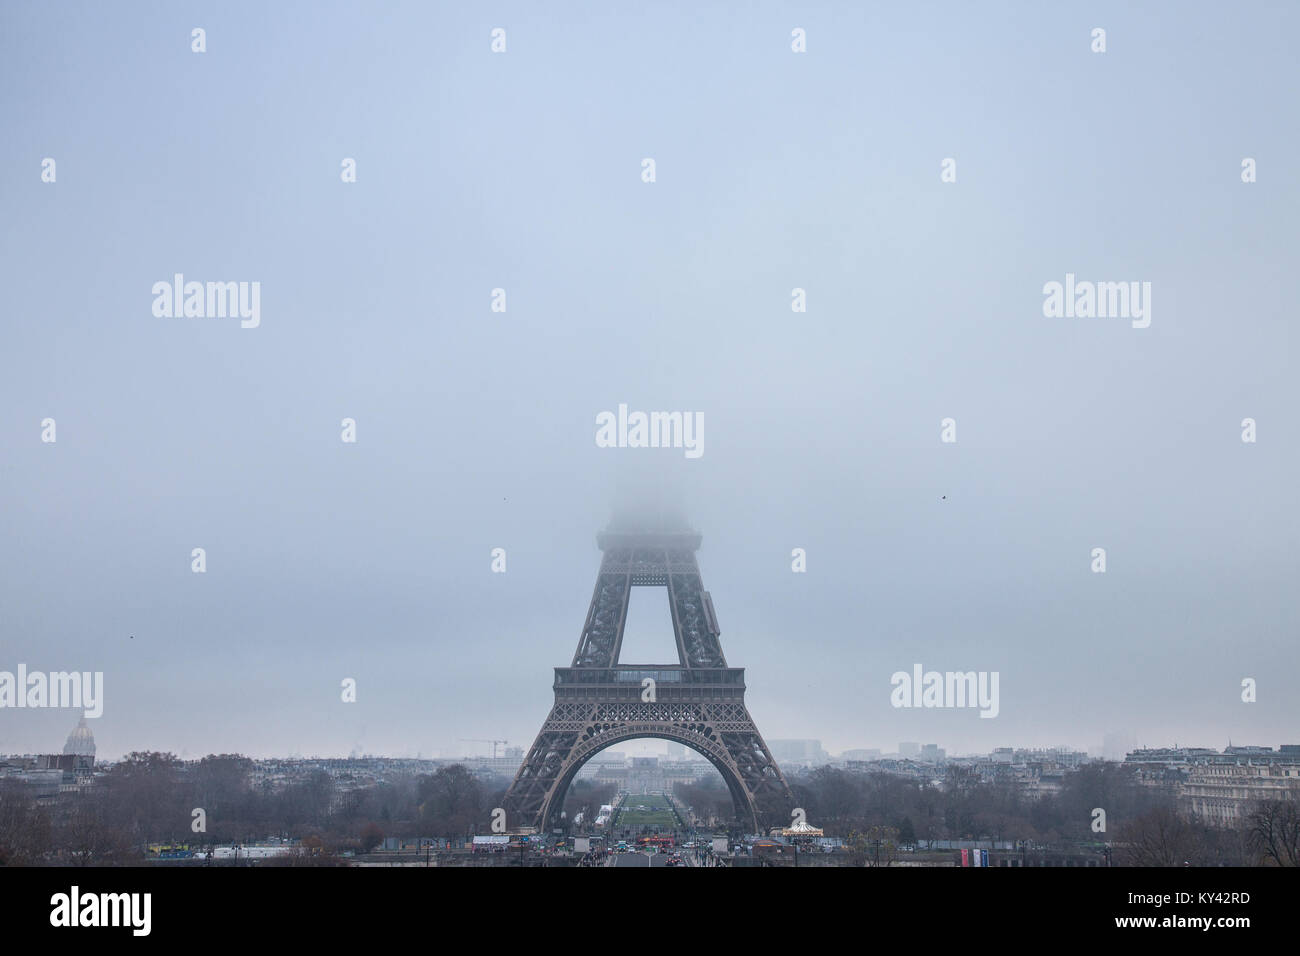 PARIS, FRANCE - DECEMBER 19, 2017: Panoramic view of the Eiffel Tower seen from Trocadero terraces, the top of the tower hidden by clouds and fog due  Stock Photo